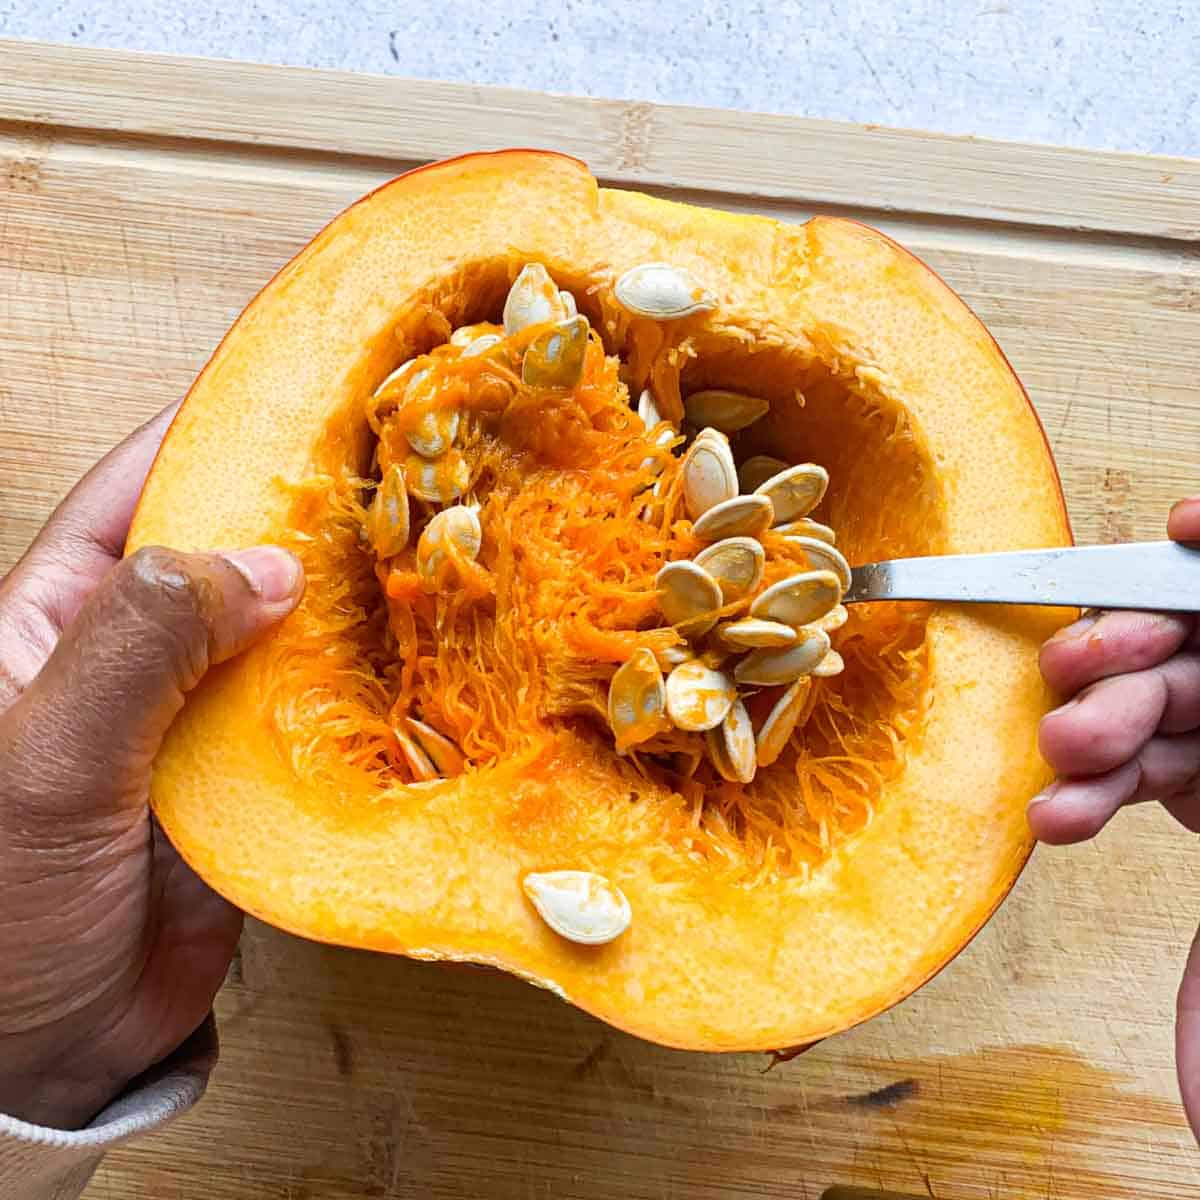 Scooping out seeds and insides of pumpkin half